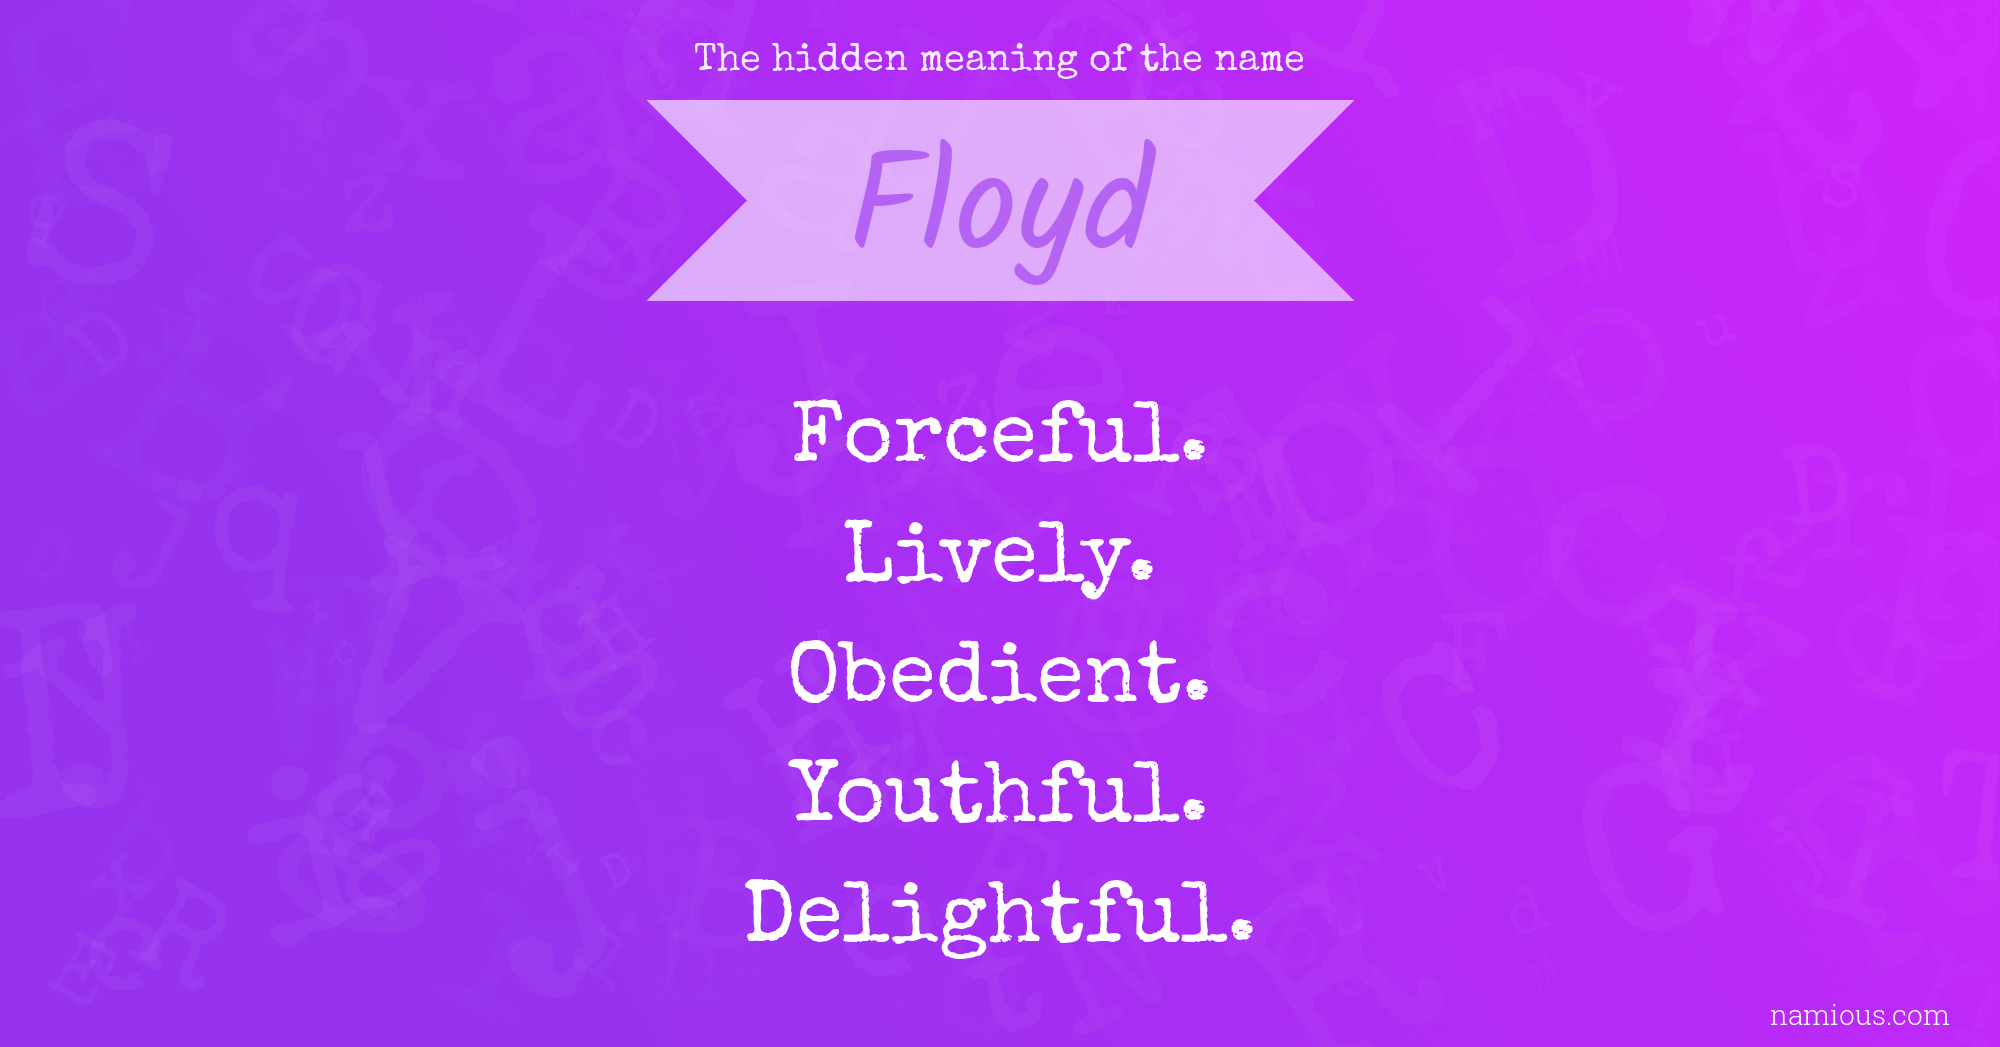 The hidden meaning of the name Floyd